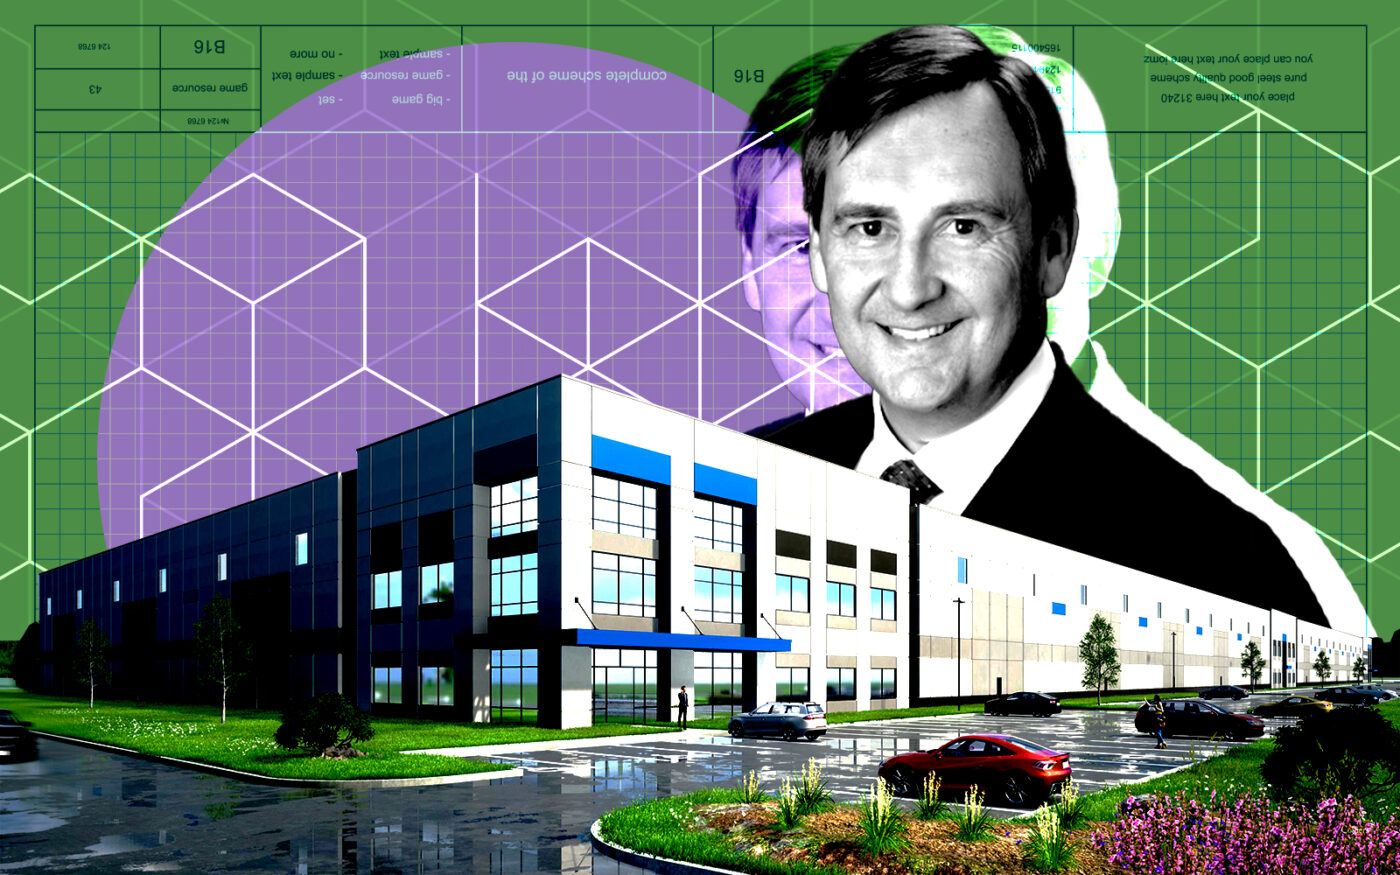 Dermody expands suburban office-to-industrial plans as Bridge scales back